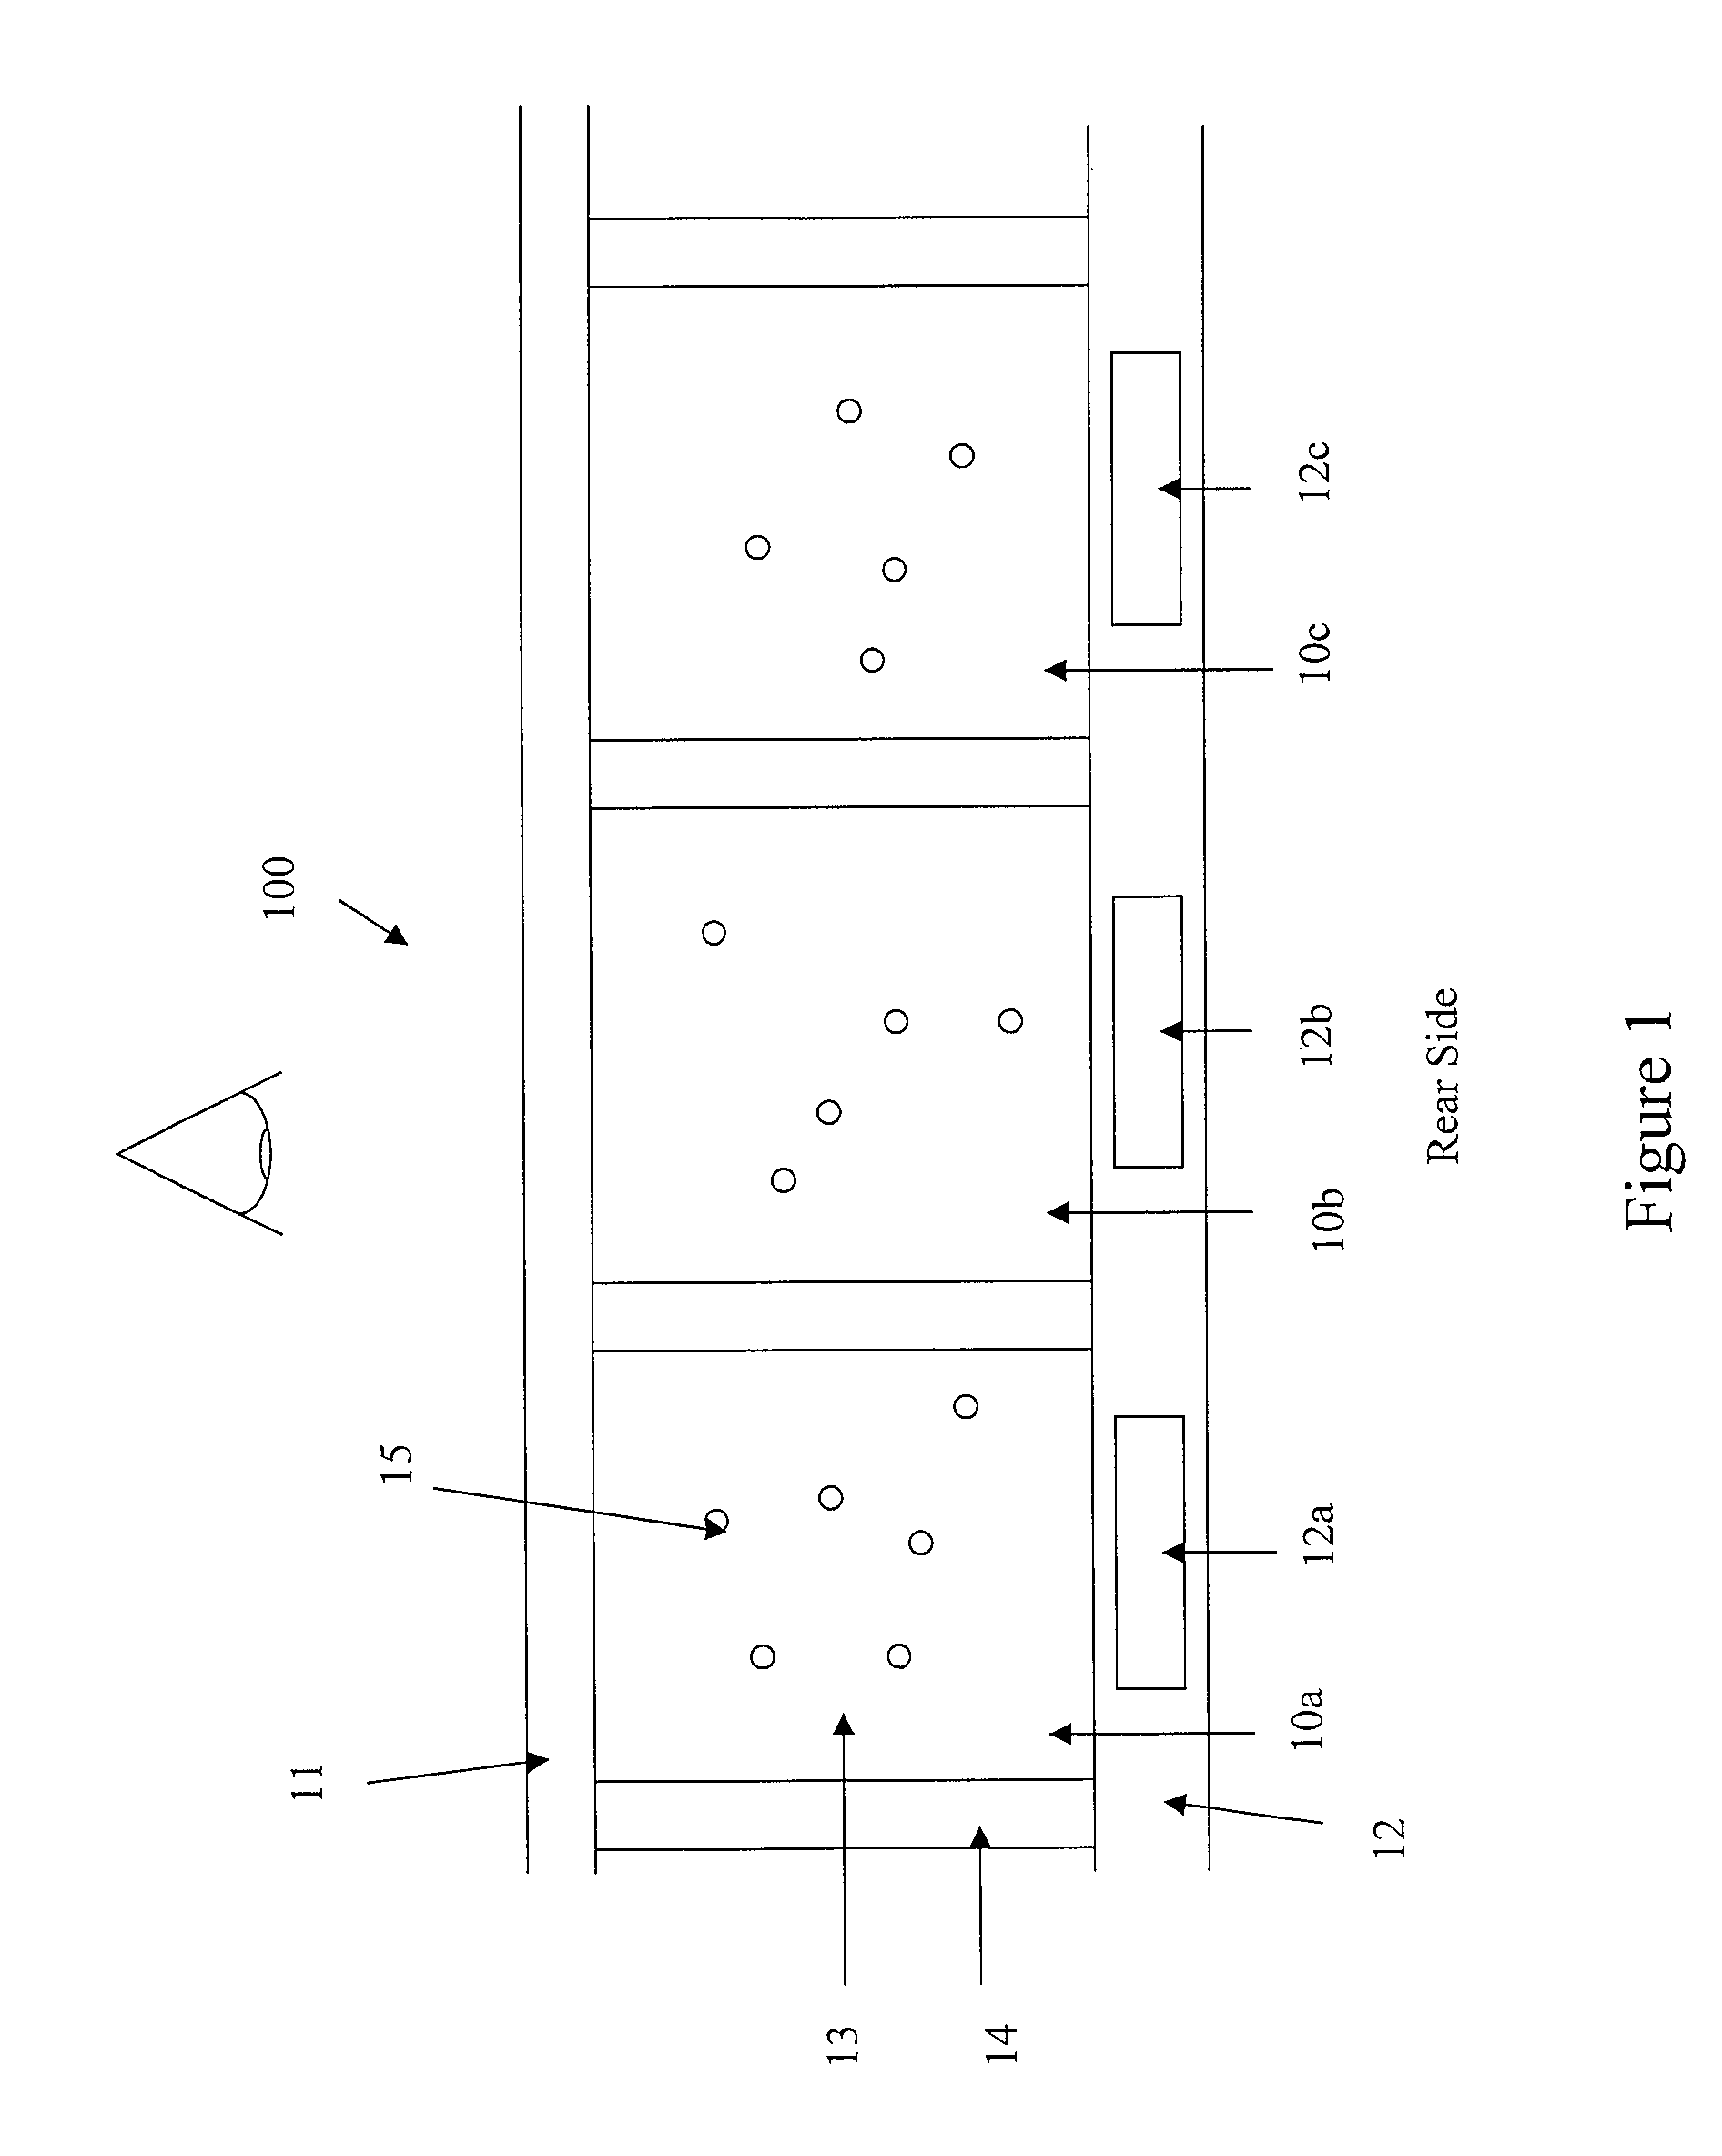 Driving method to neutralize grey level shift for electrophoretic displays